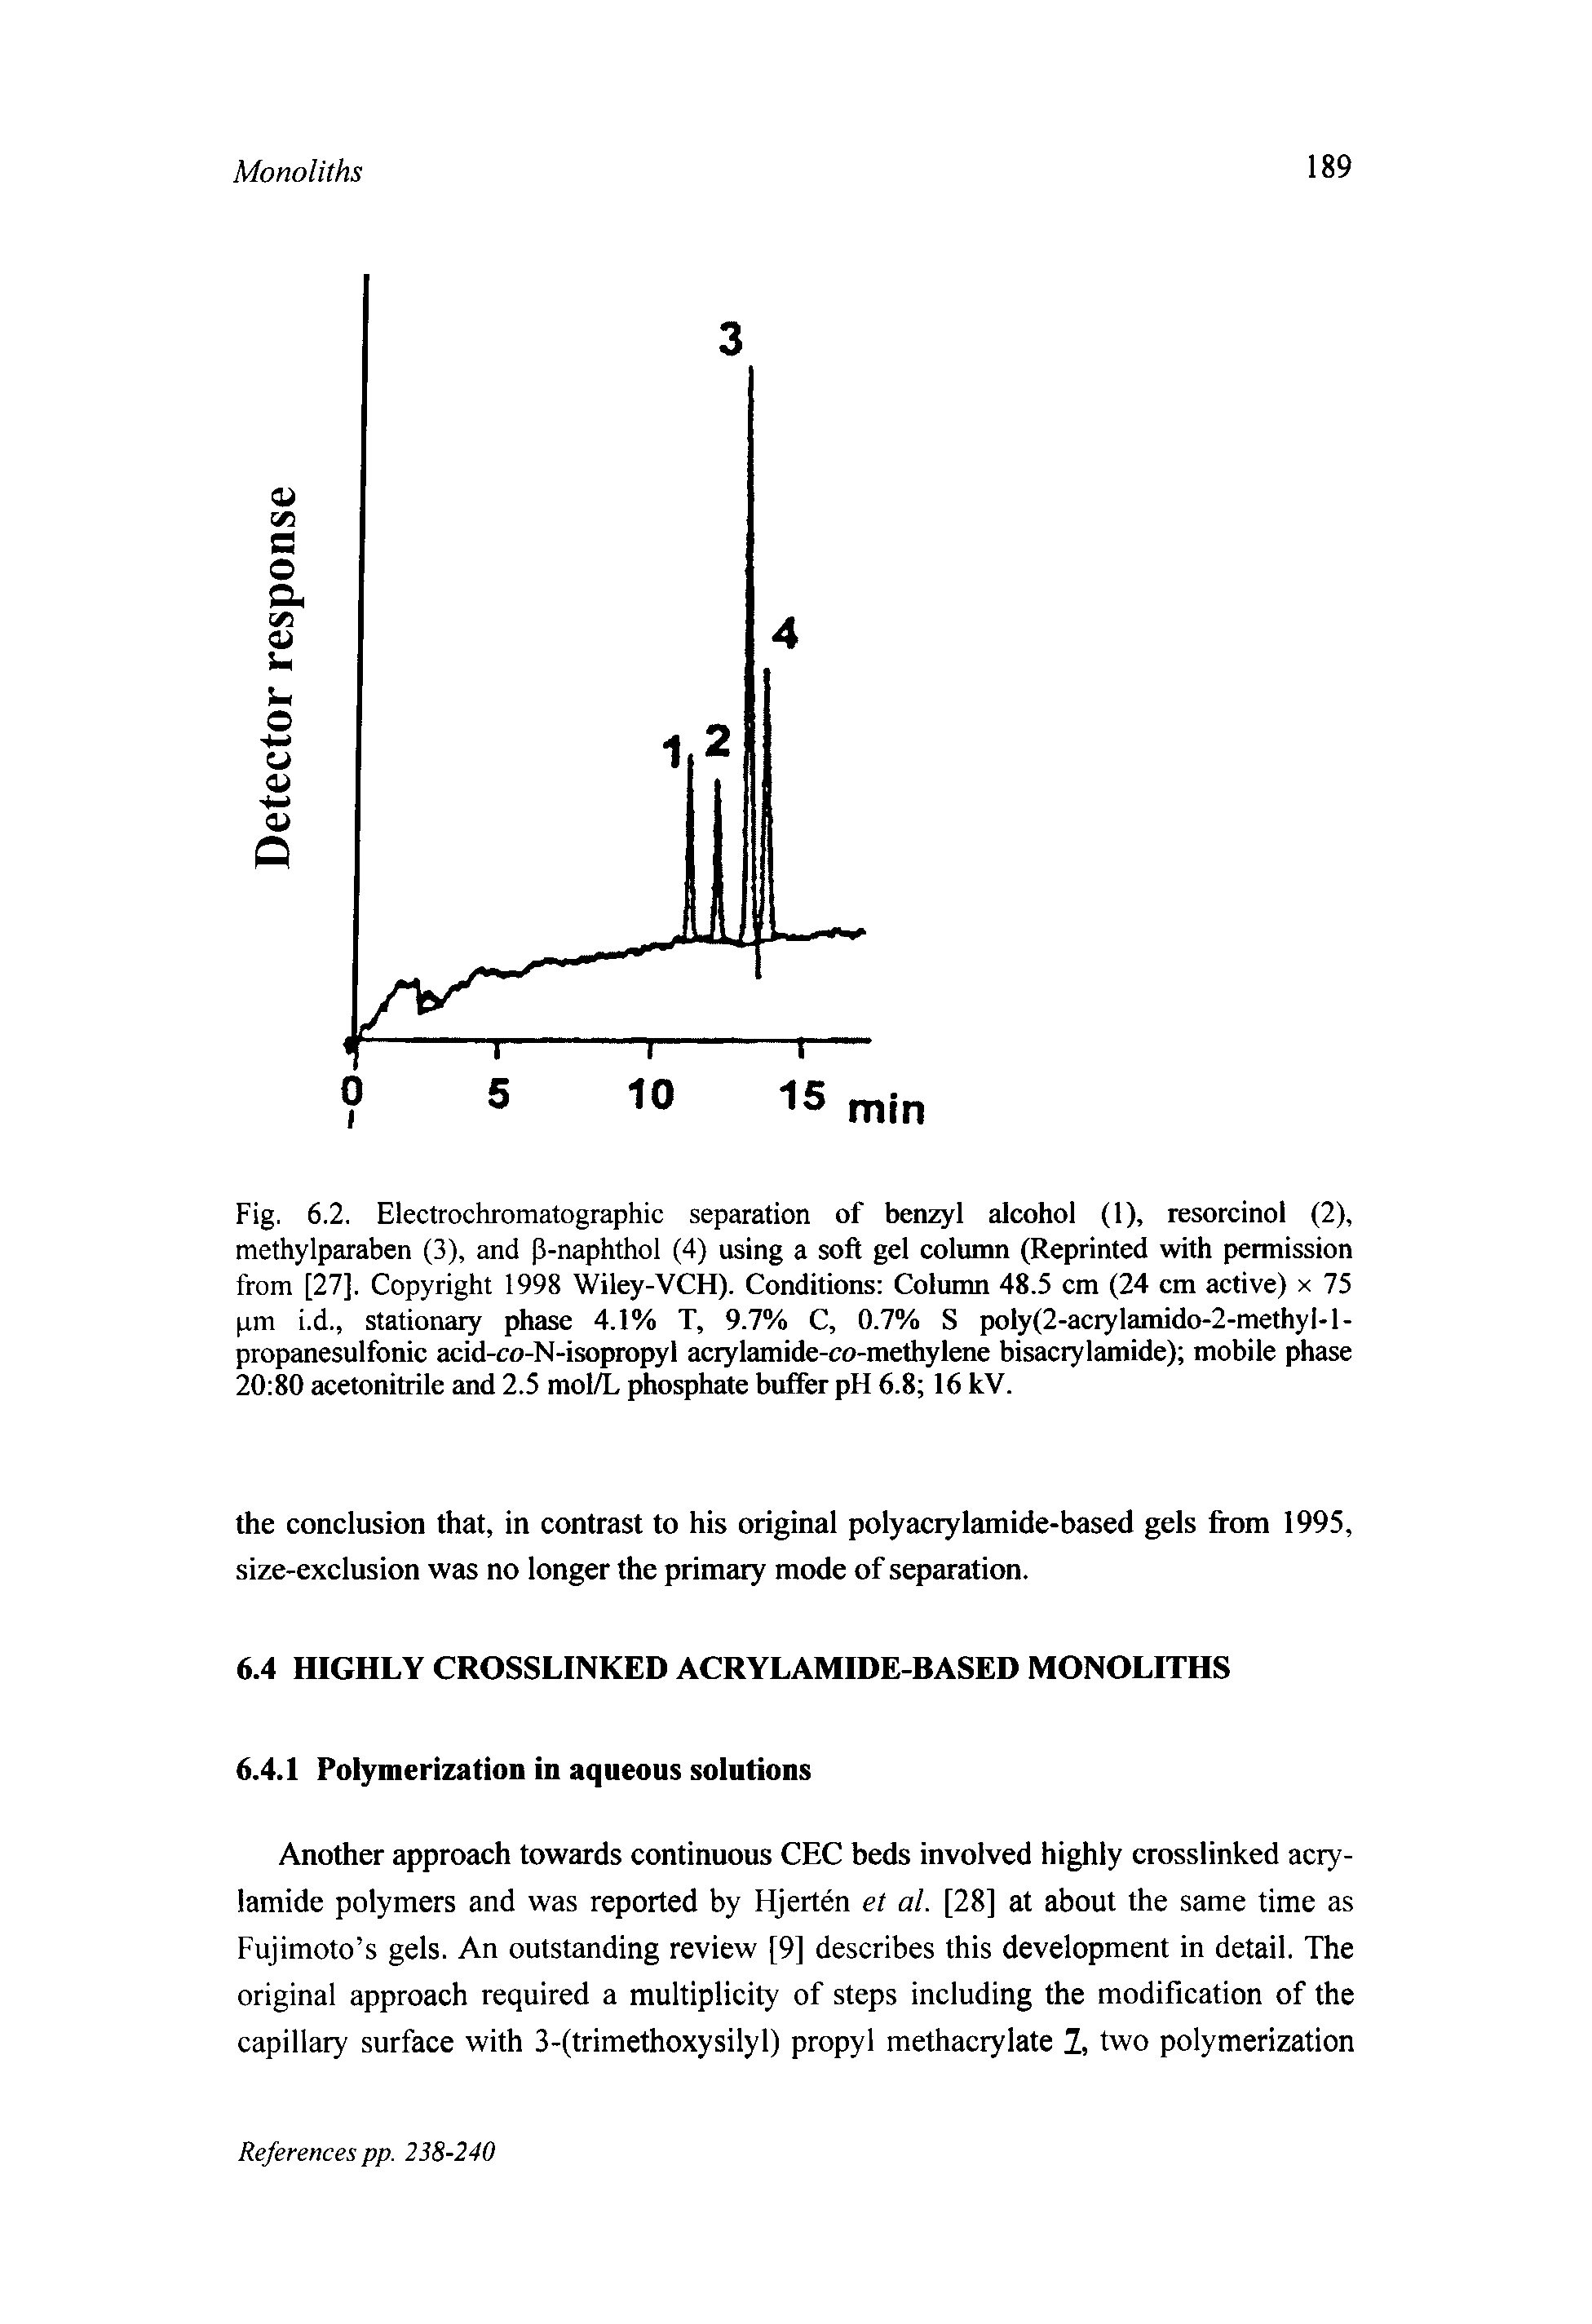 Fig. 6.2. Electrochromatographic separation of benzyl alcohol (1), resorcinol (2), methylparaben (3), and p-naphthol (4) using a soft gel column (Reprinted with permission from [27], Copyright 1998 Wiley-VCH). Conditions Column 48.5 cm (24 cm active) x 75 pm i.d., stationary phase 4.1% T, 9.7% C, 0.7% S poly(2-acrylamido-2-methyl-l-propanesulfonic acid-co-N-isopropyl acrylamide-co-methylene bisacrylamide) mobile phase 20 80 acetonitrile and 2.5 mol/L phosphate buffer pH 6.8 16 kV.